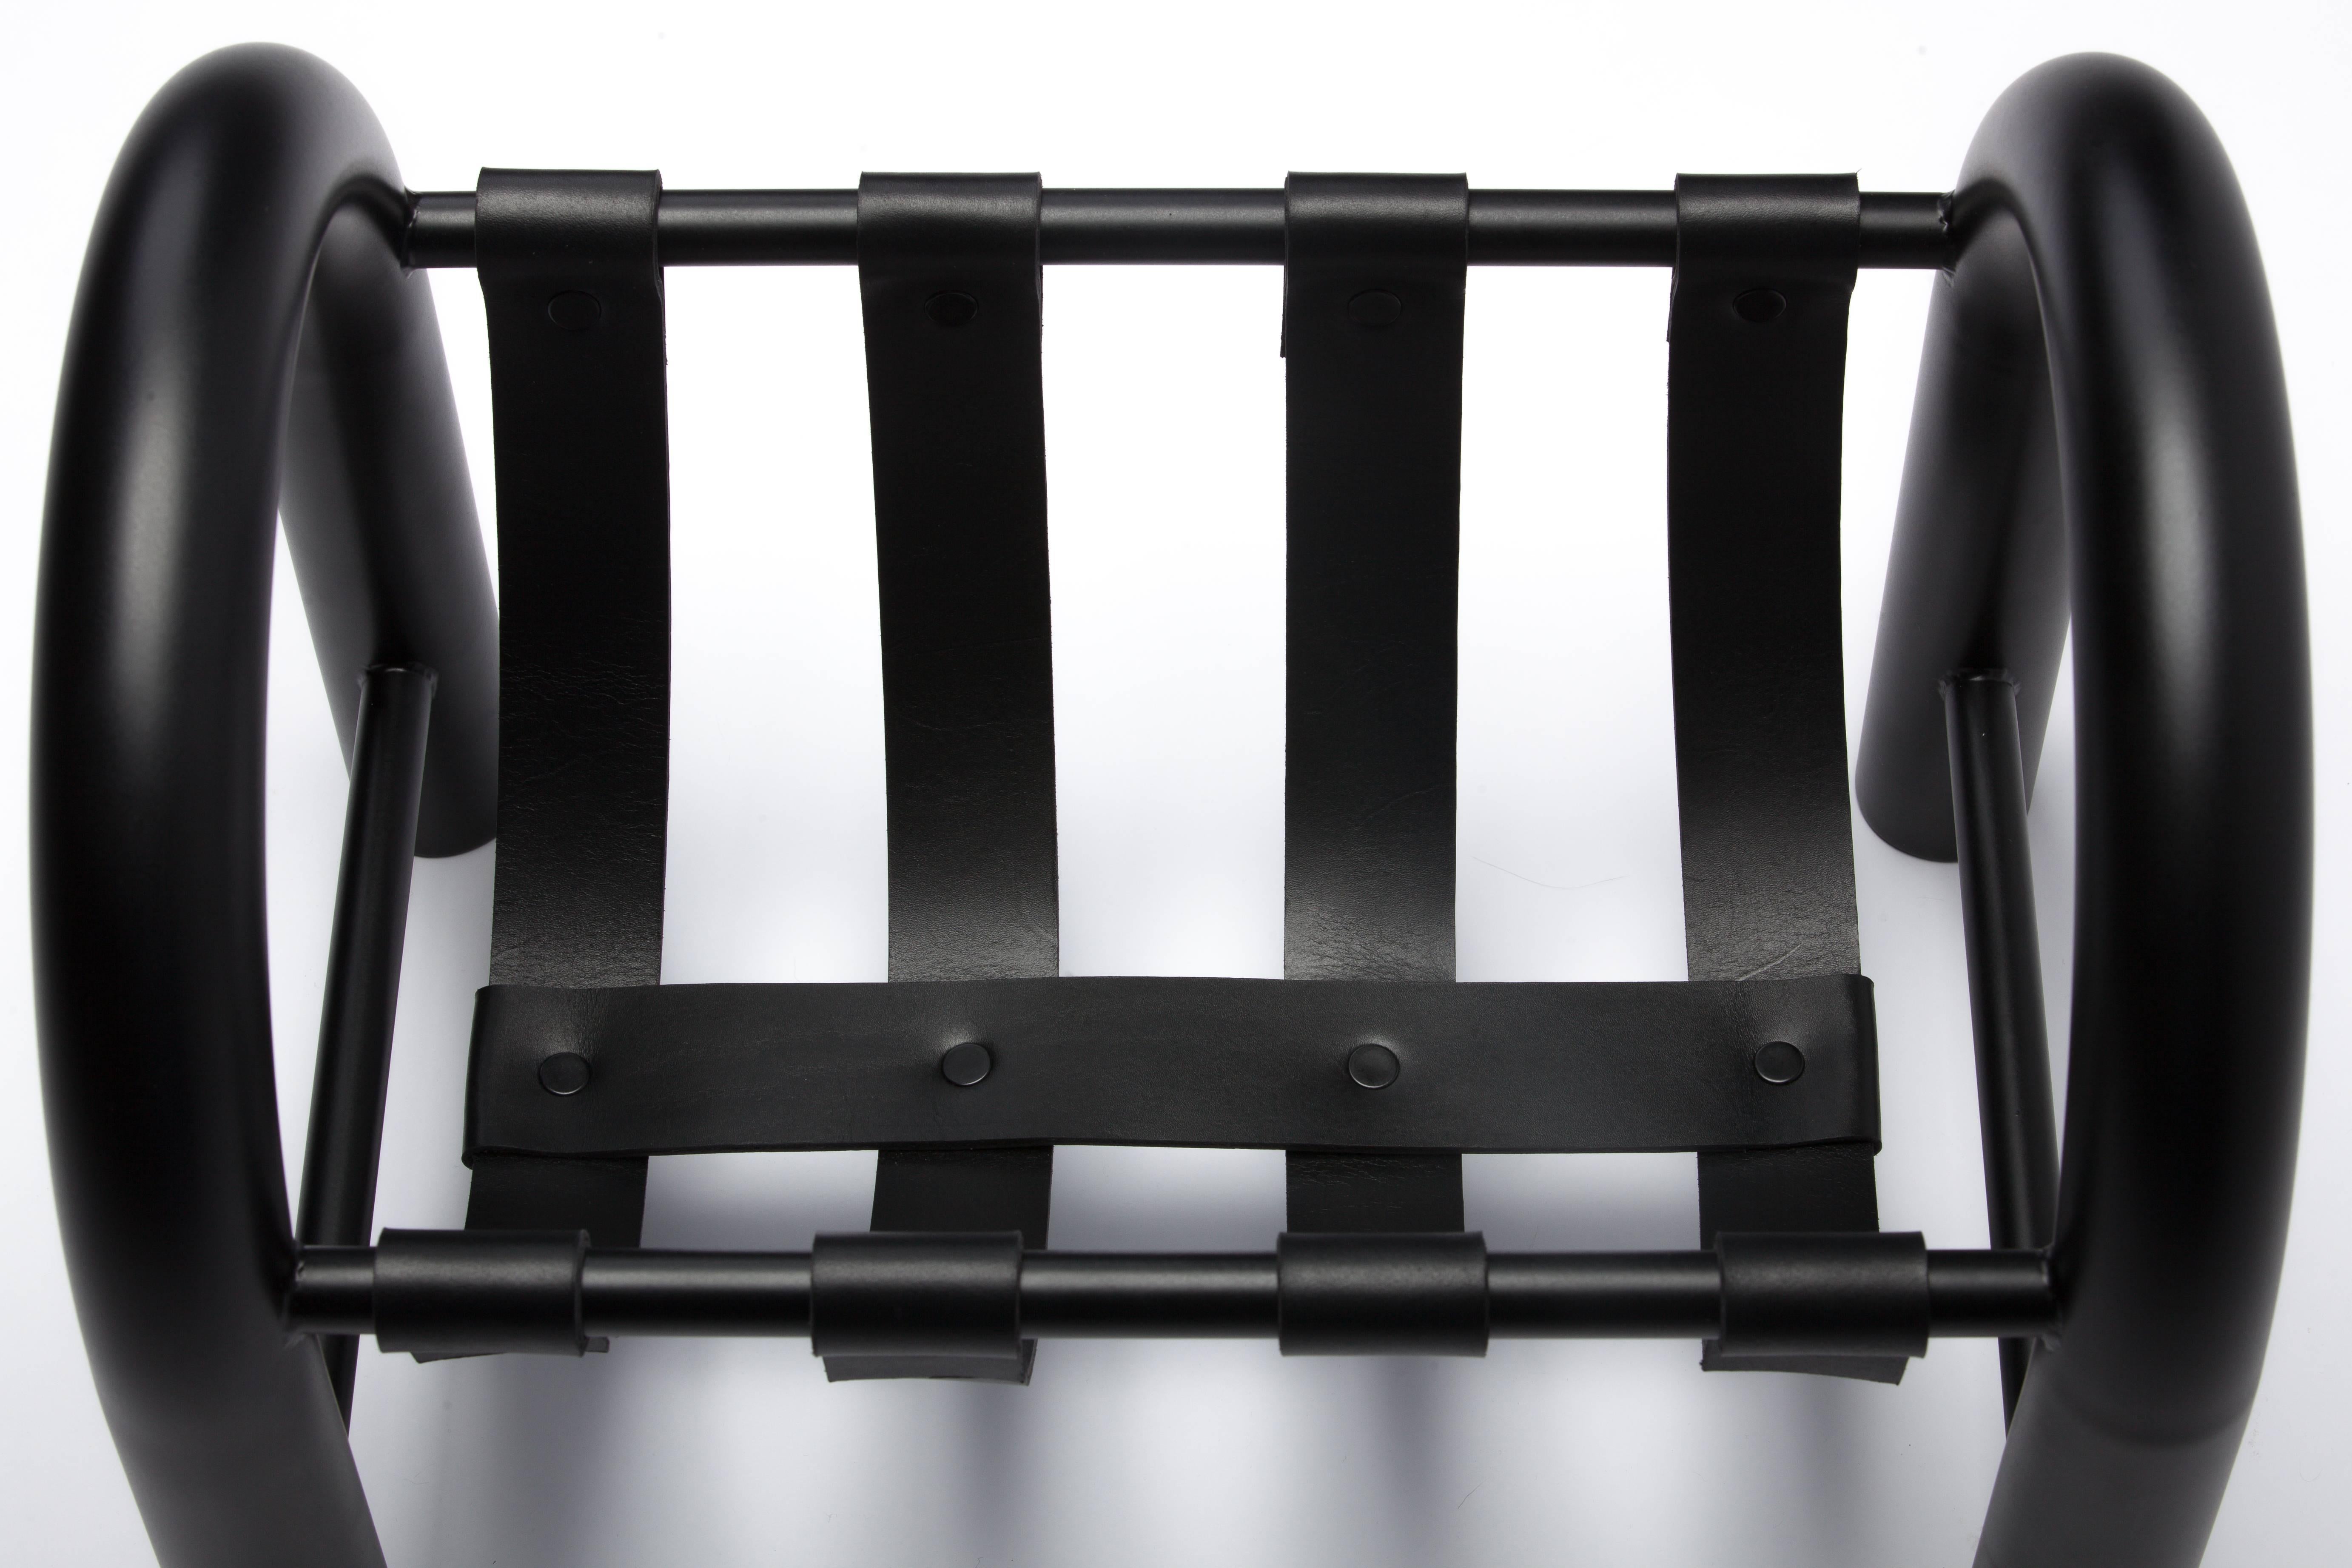 Steel Tubular Magazine Rack by Another Human, Contemporary, Metal and Leather